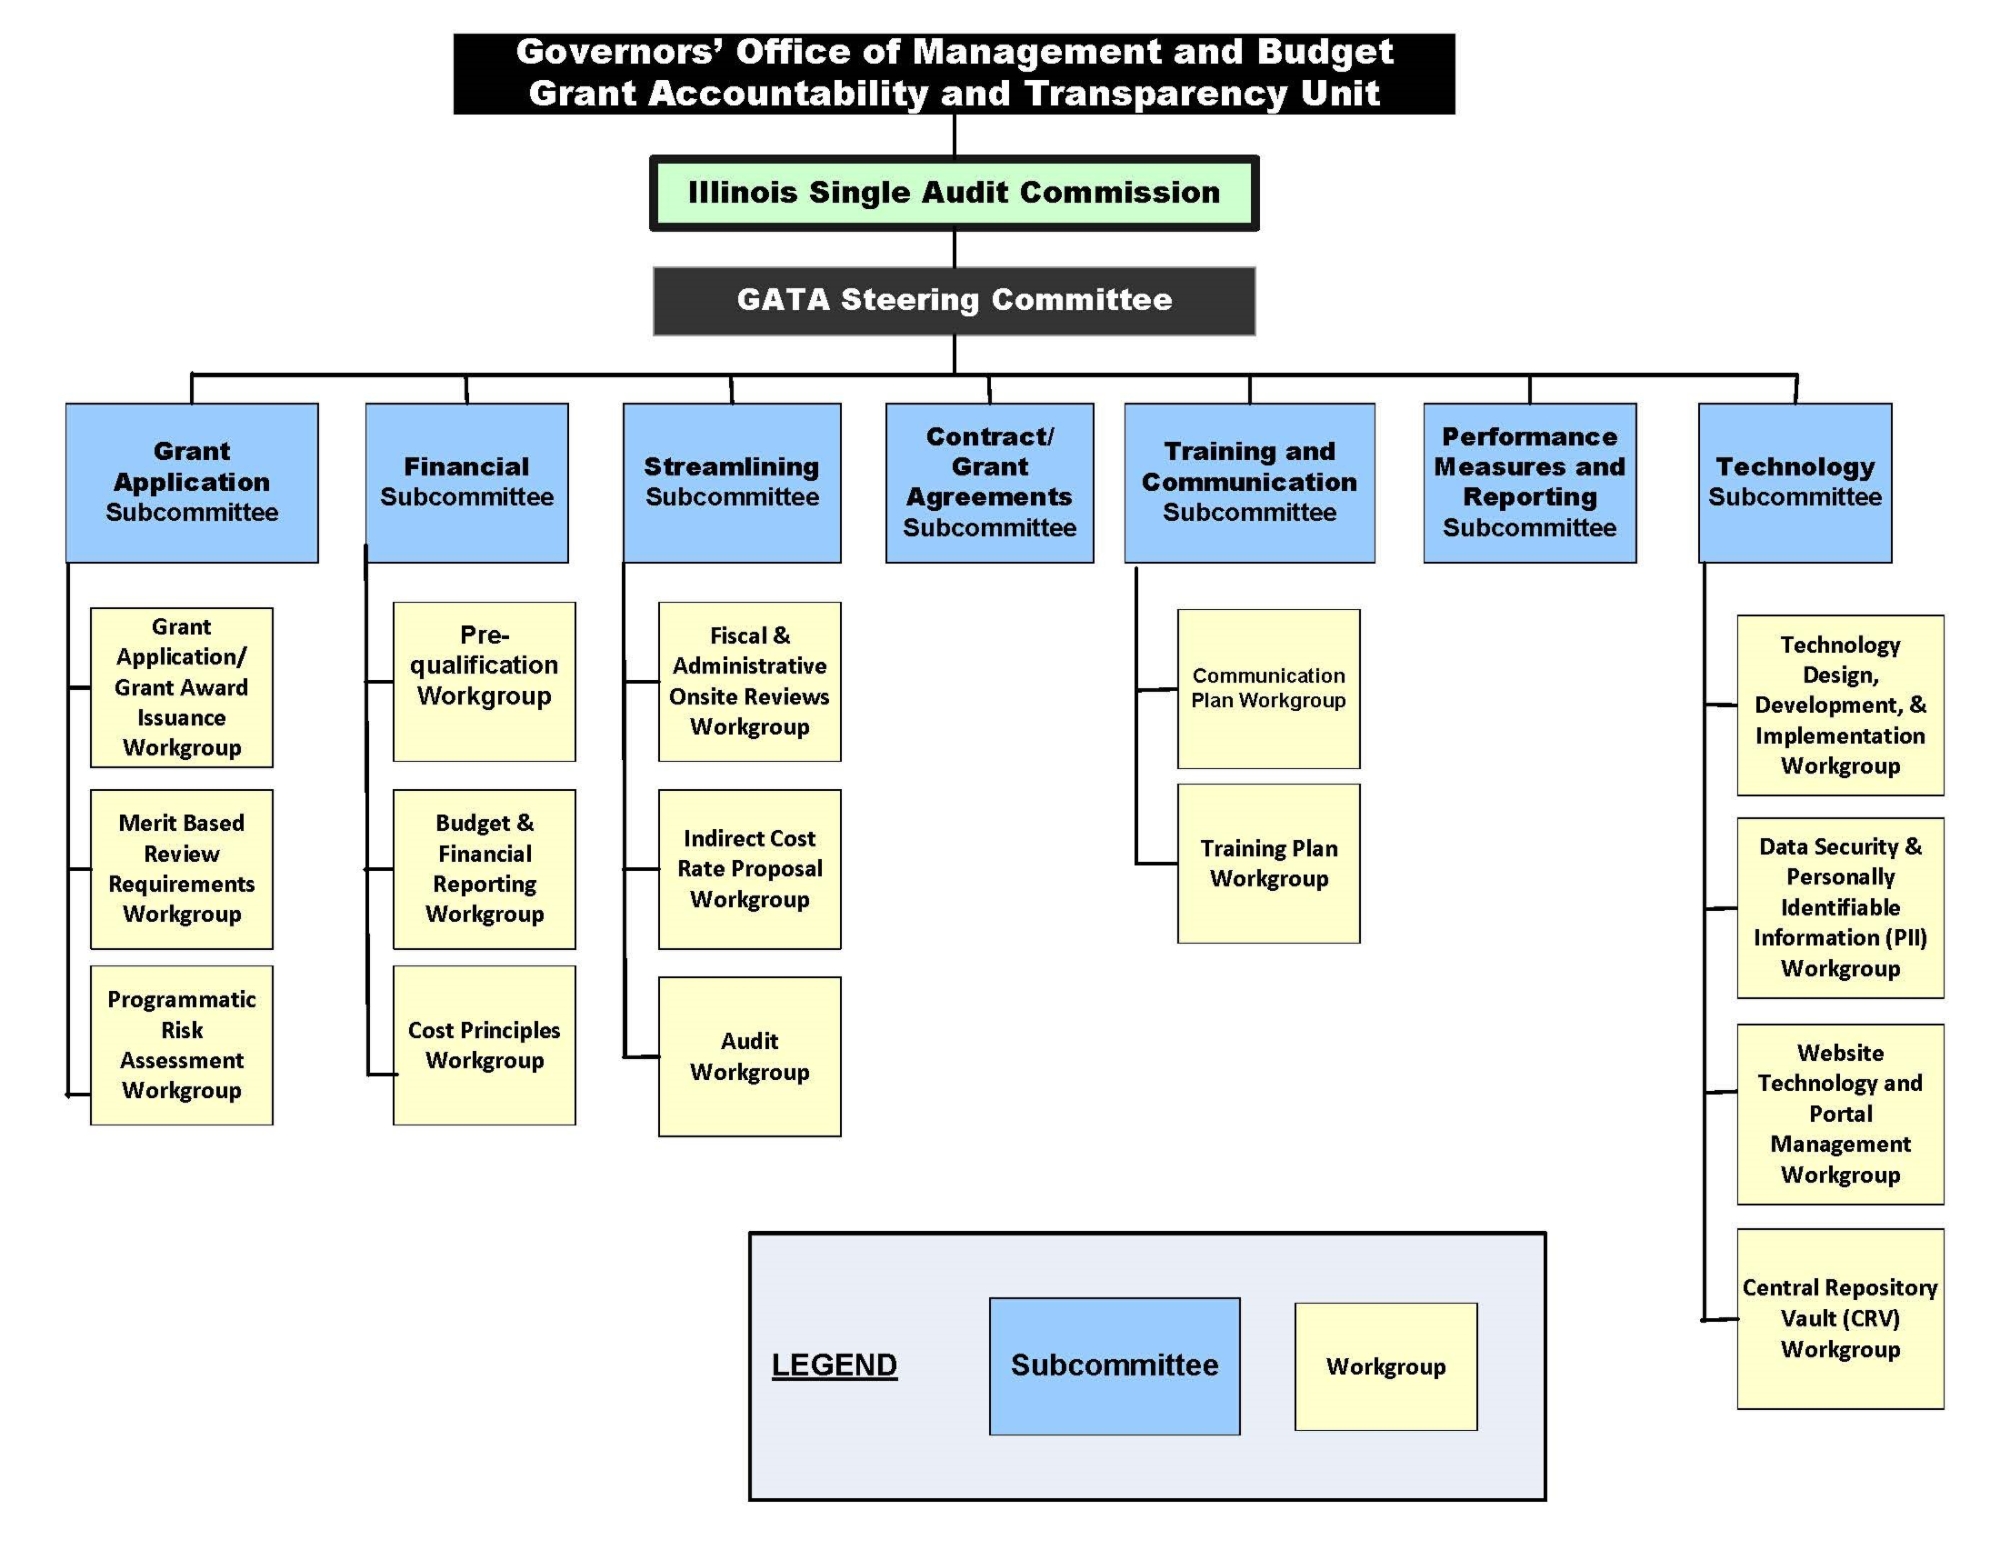 Subcommittee and Workgroup Flow Chart